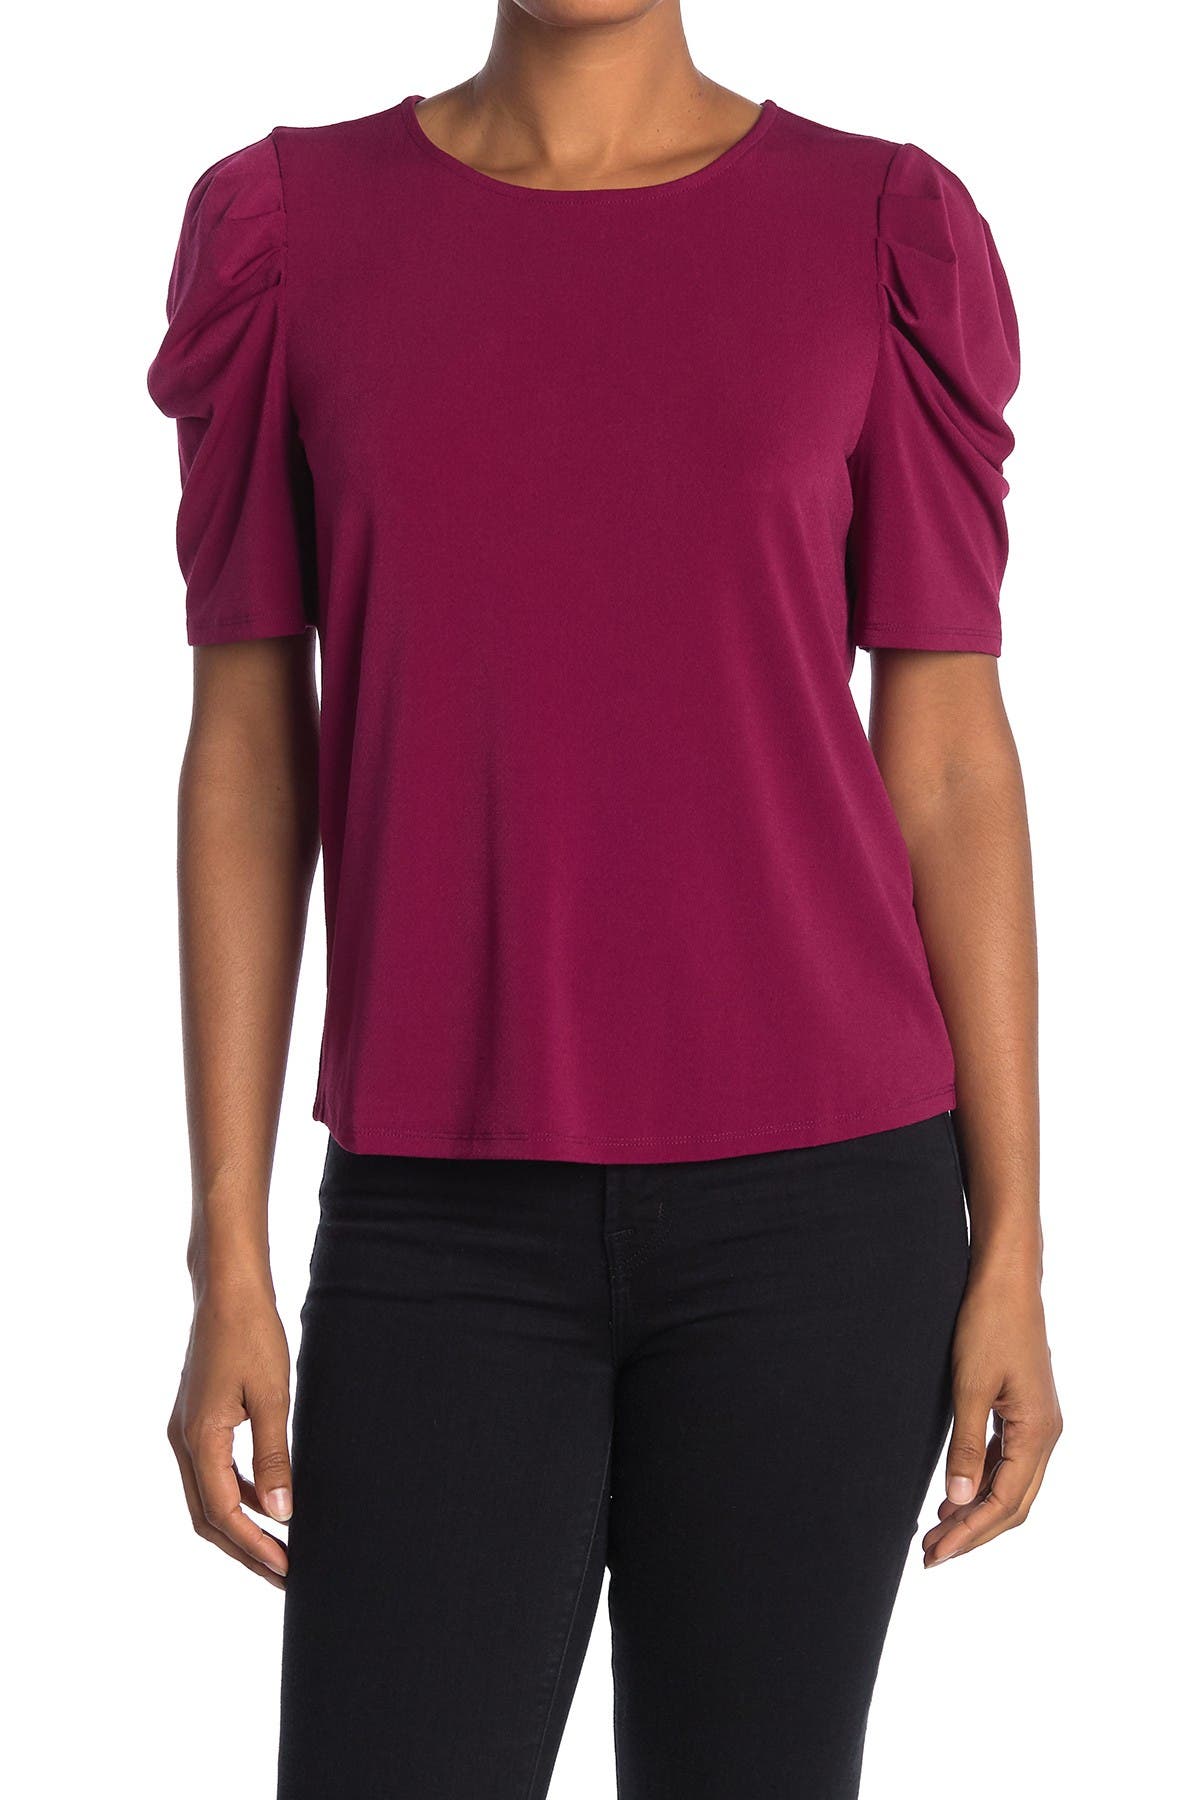 adrianna papell casual tops